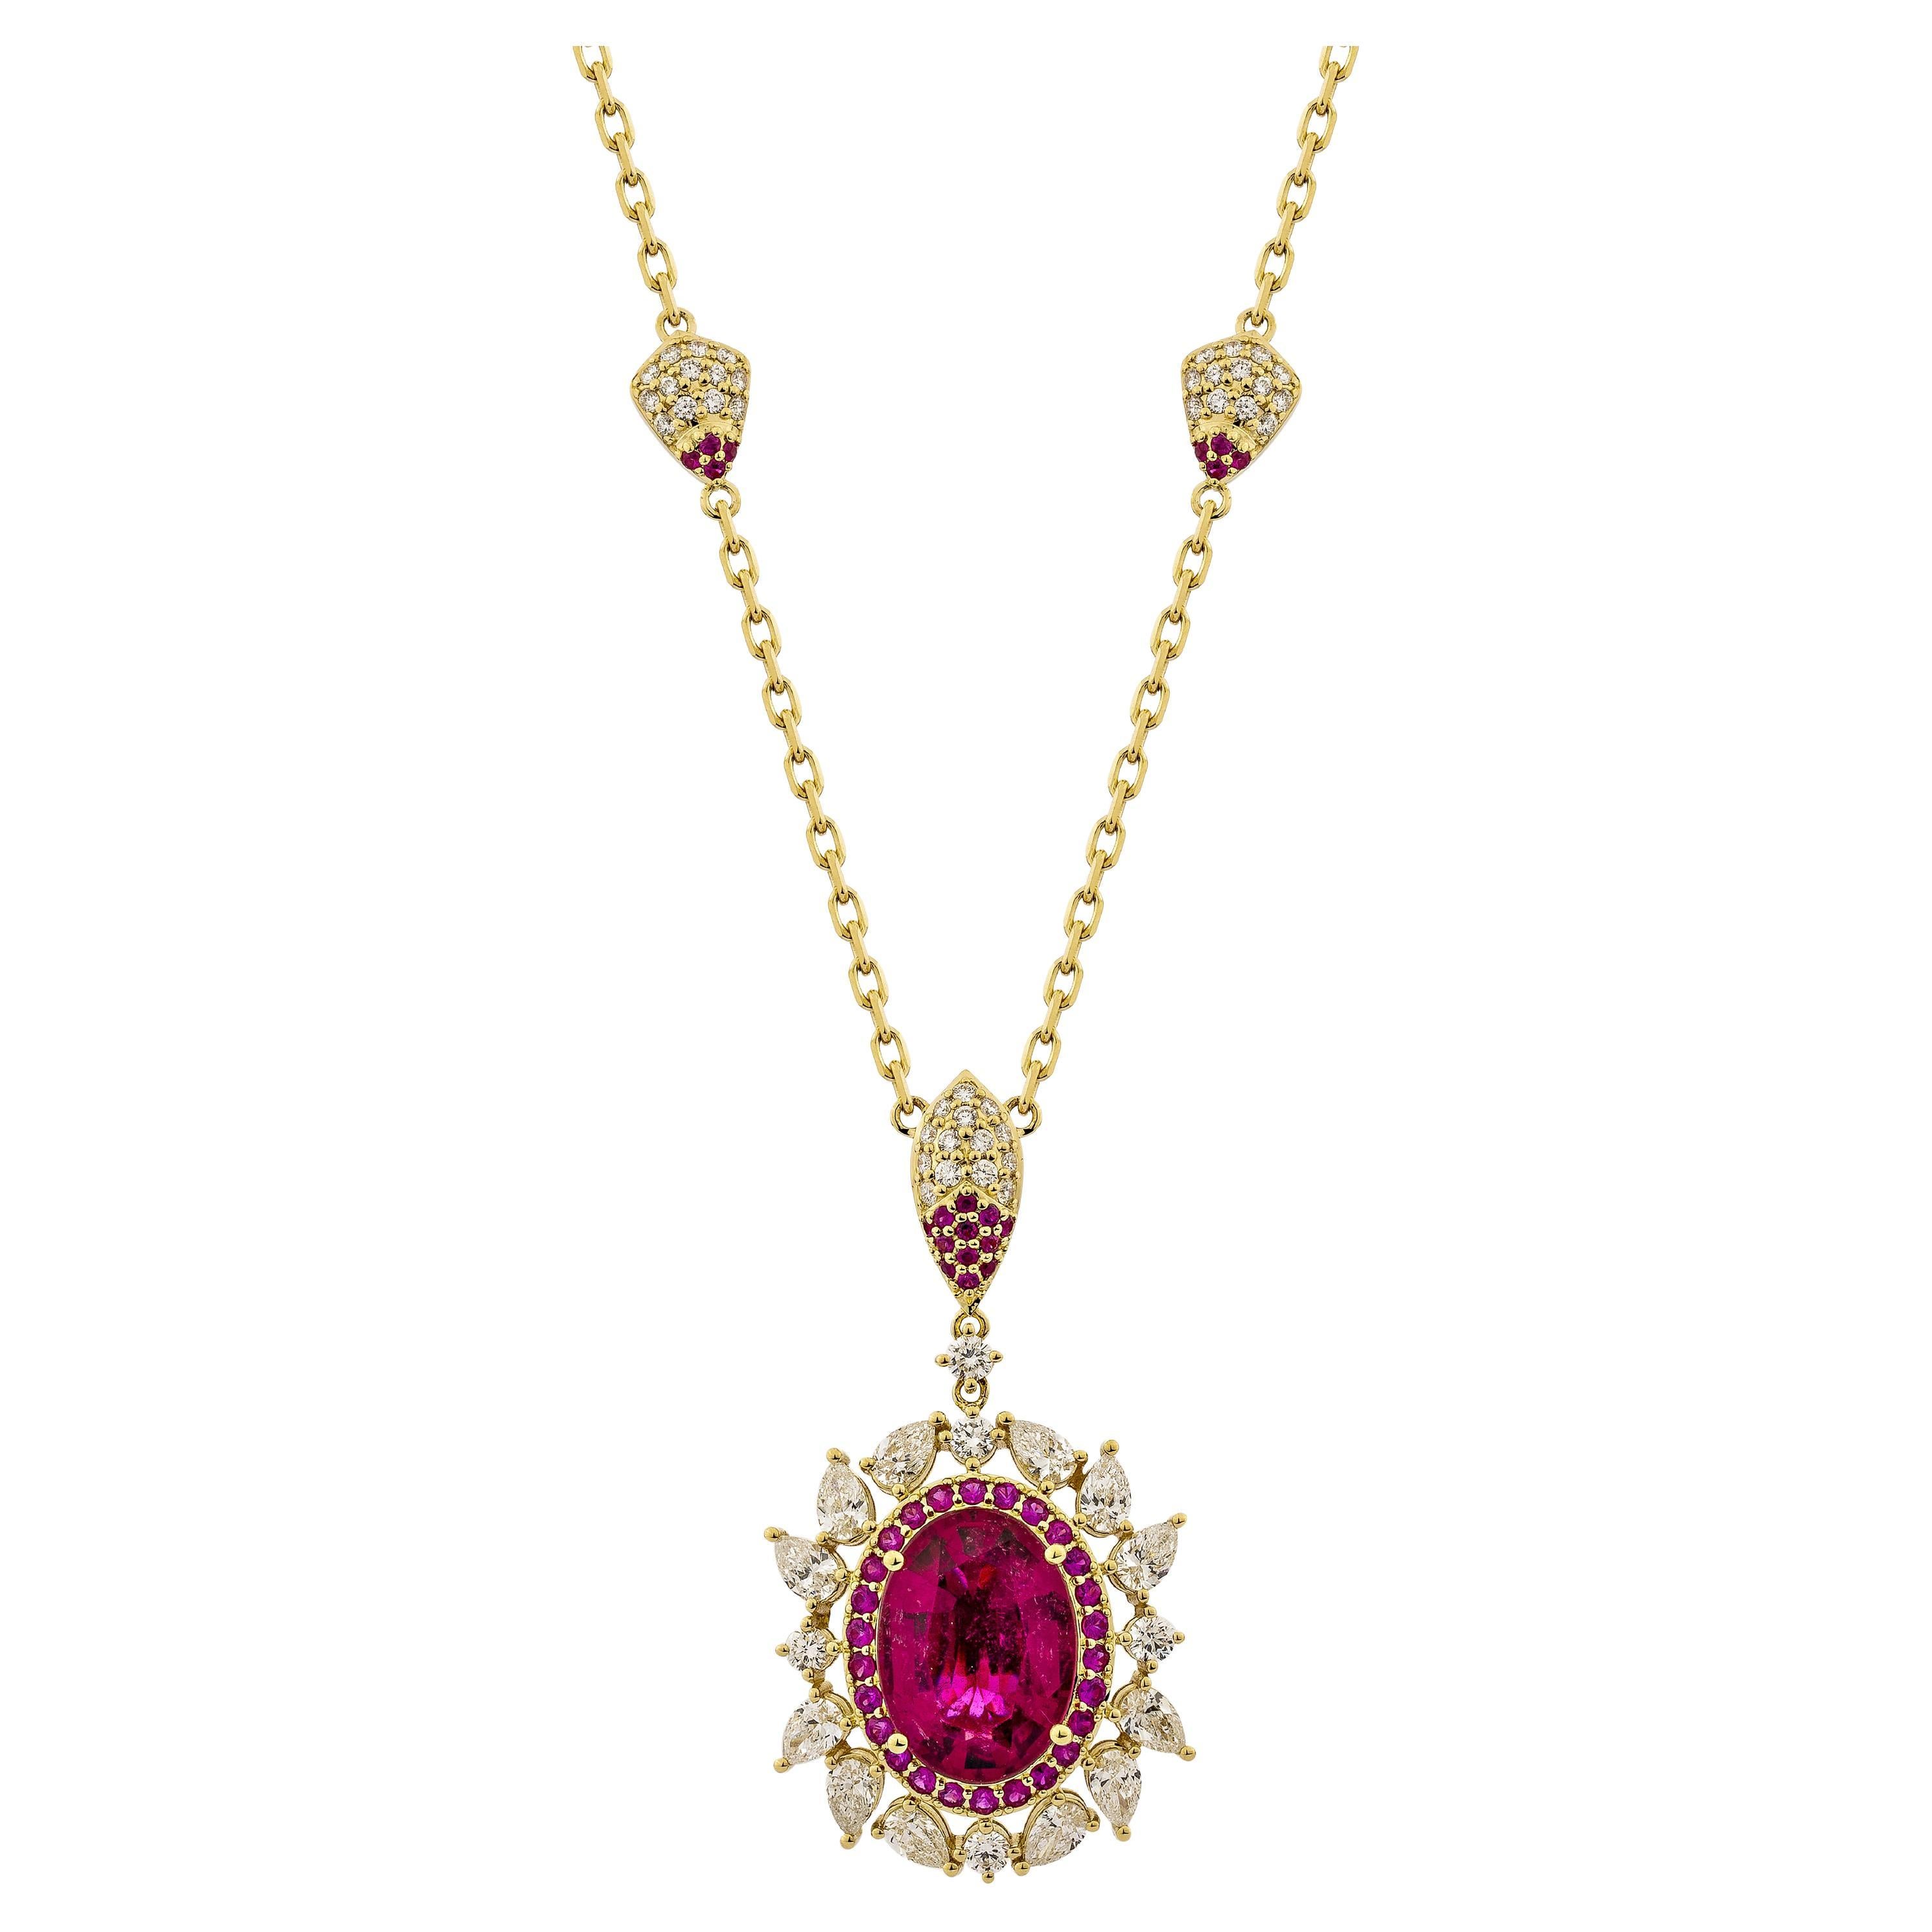 7.994 Carat Rubellite Necklace in 18KYG with Ruby and White Diamond. For Sale